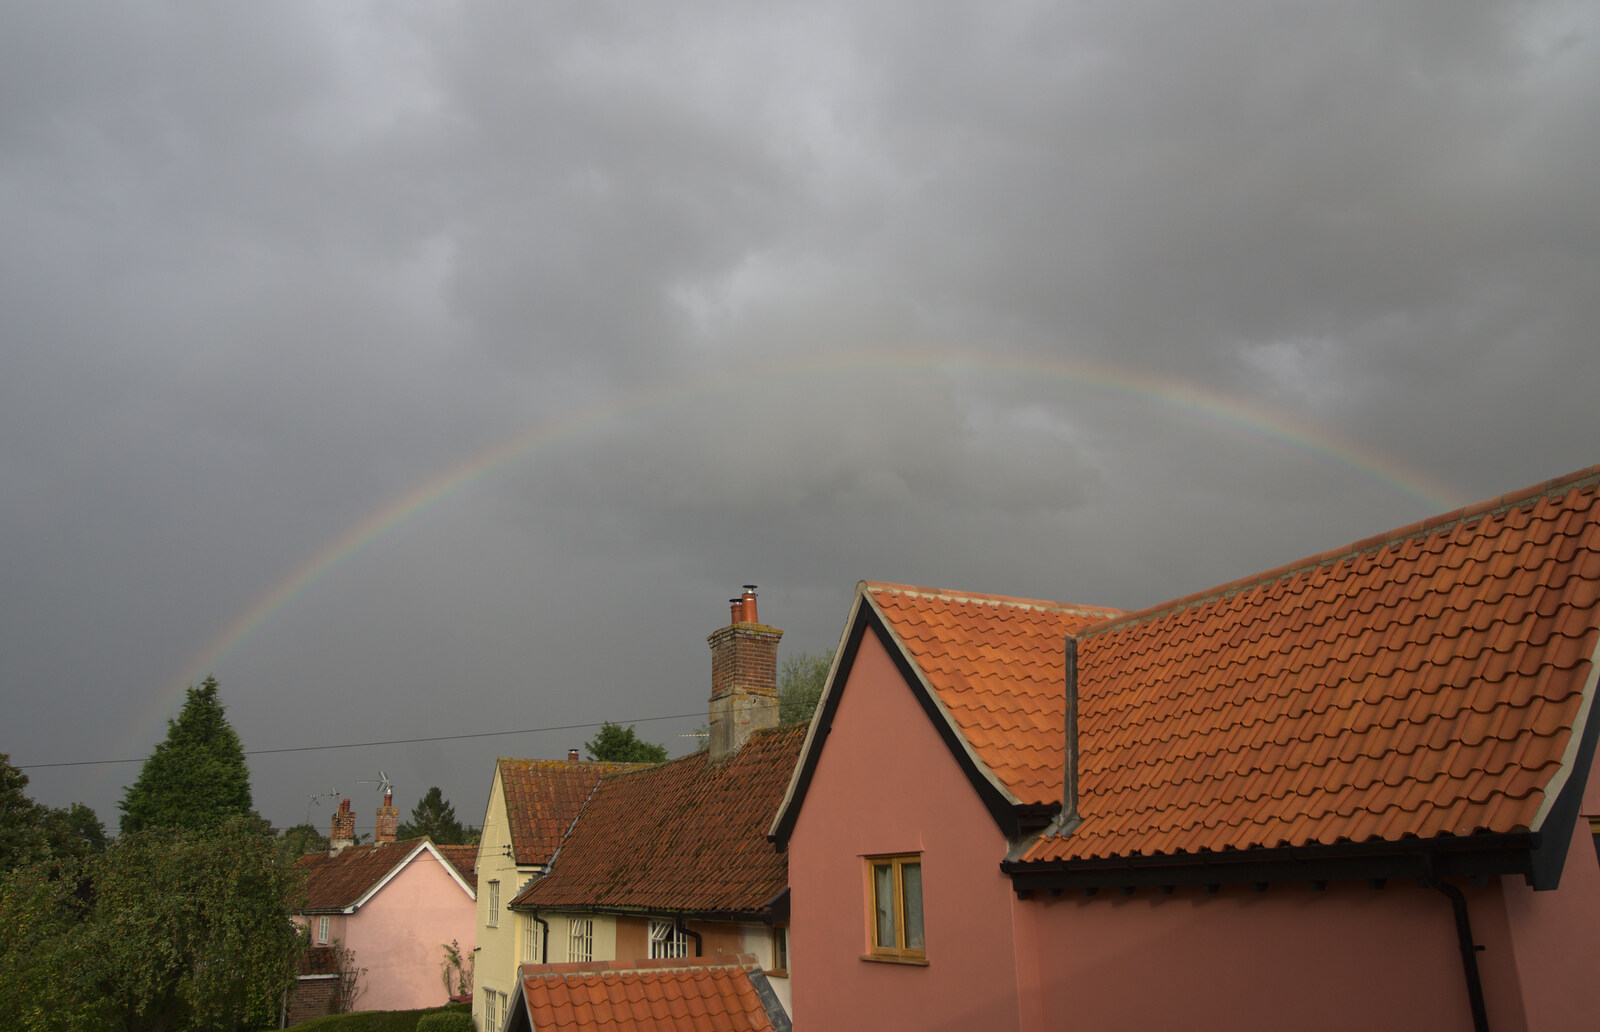 A rainbow appears over the house from Matthew's Birthday up The Swan Inn, Brome, Suffolk - 17th August 2014